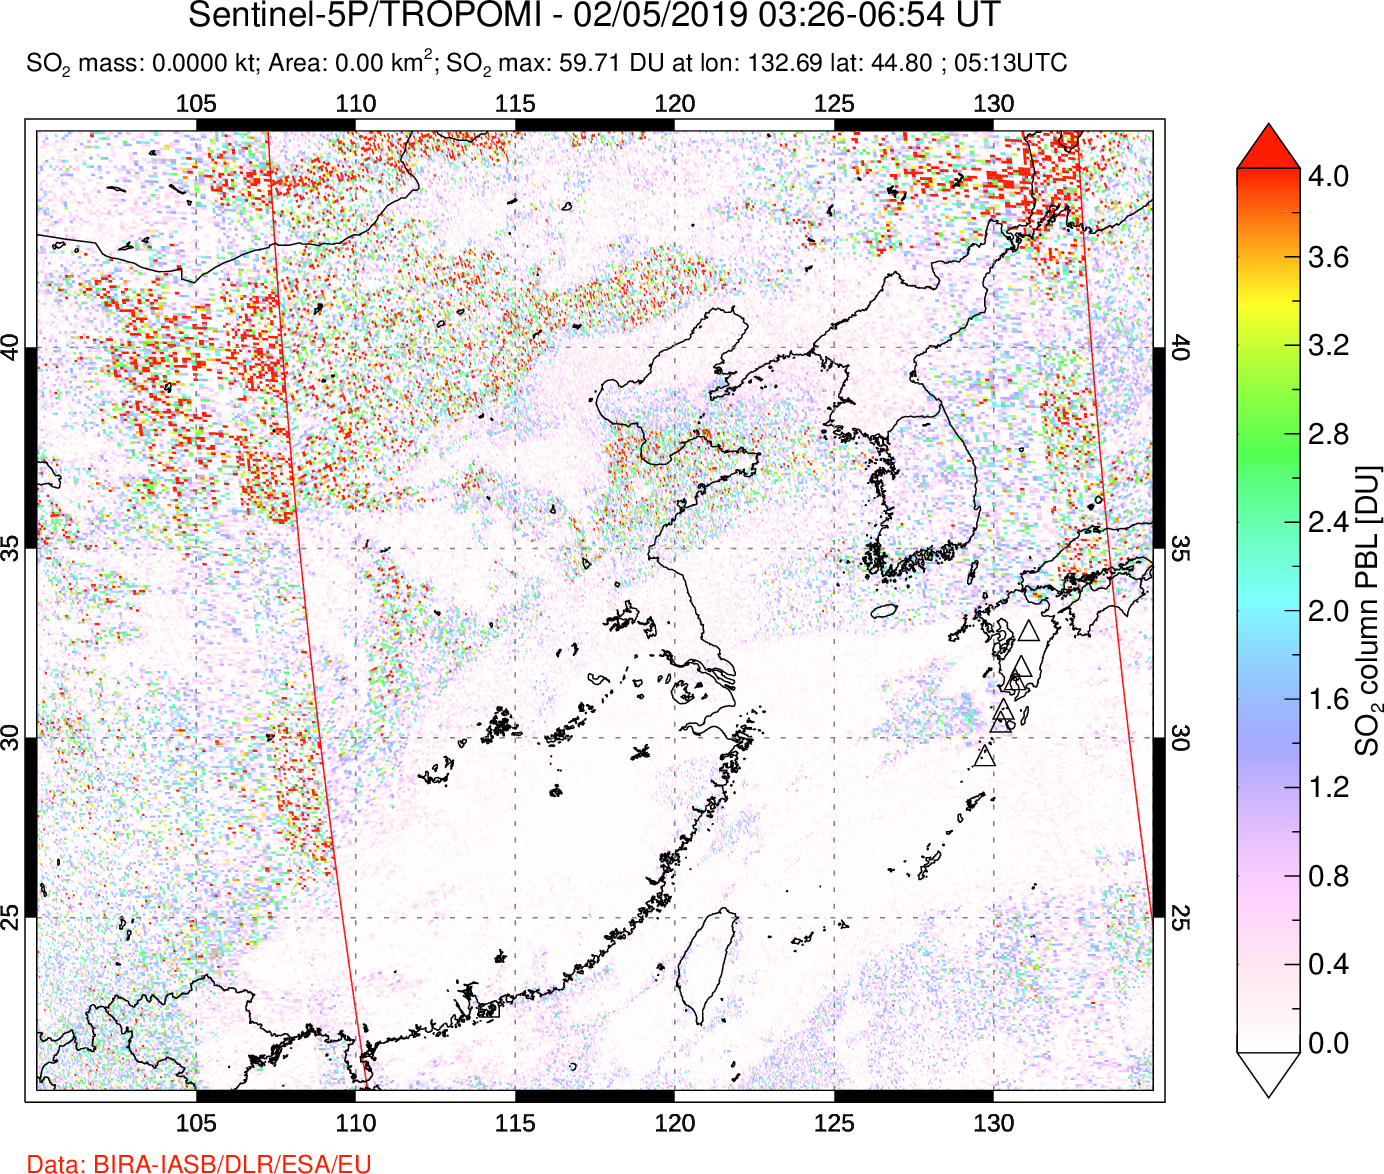 A sulfur dioxide image over Eastern China on Feb 05, 2019.